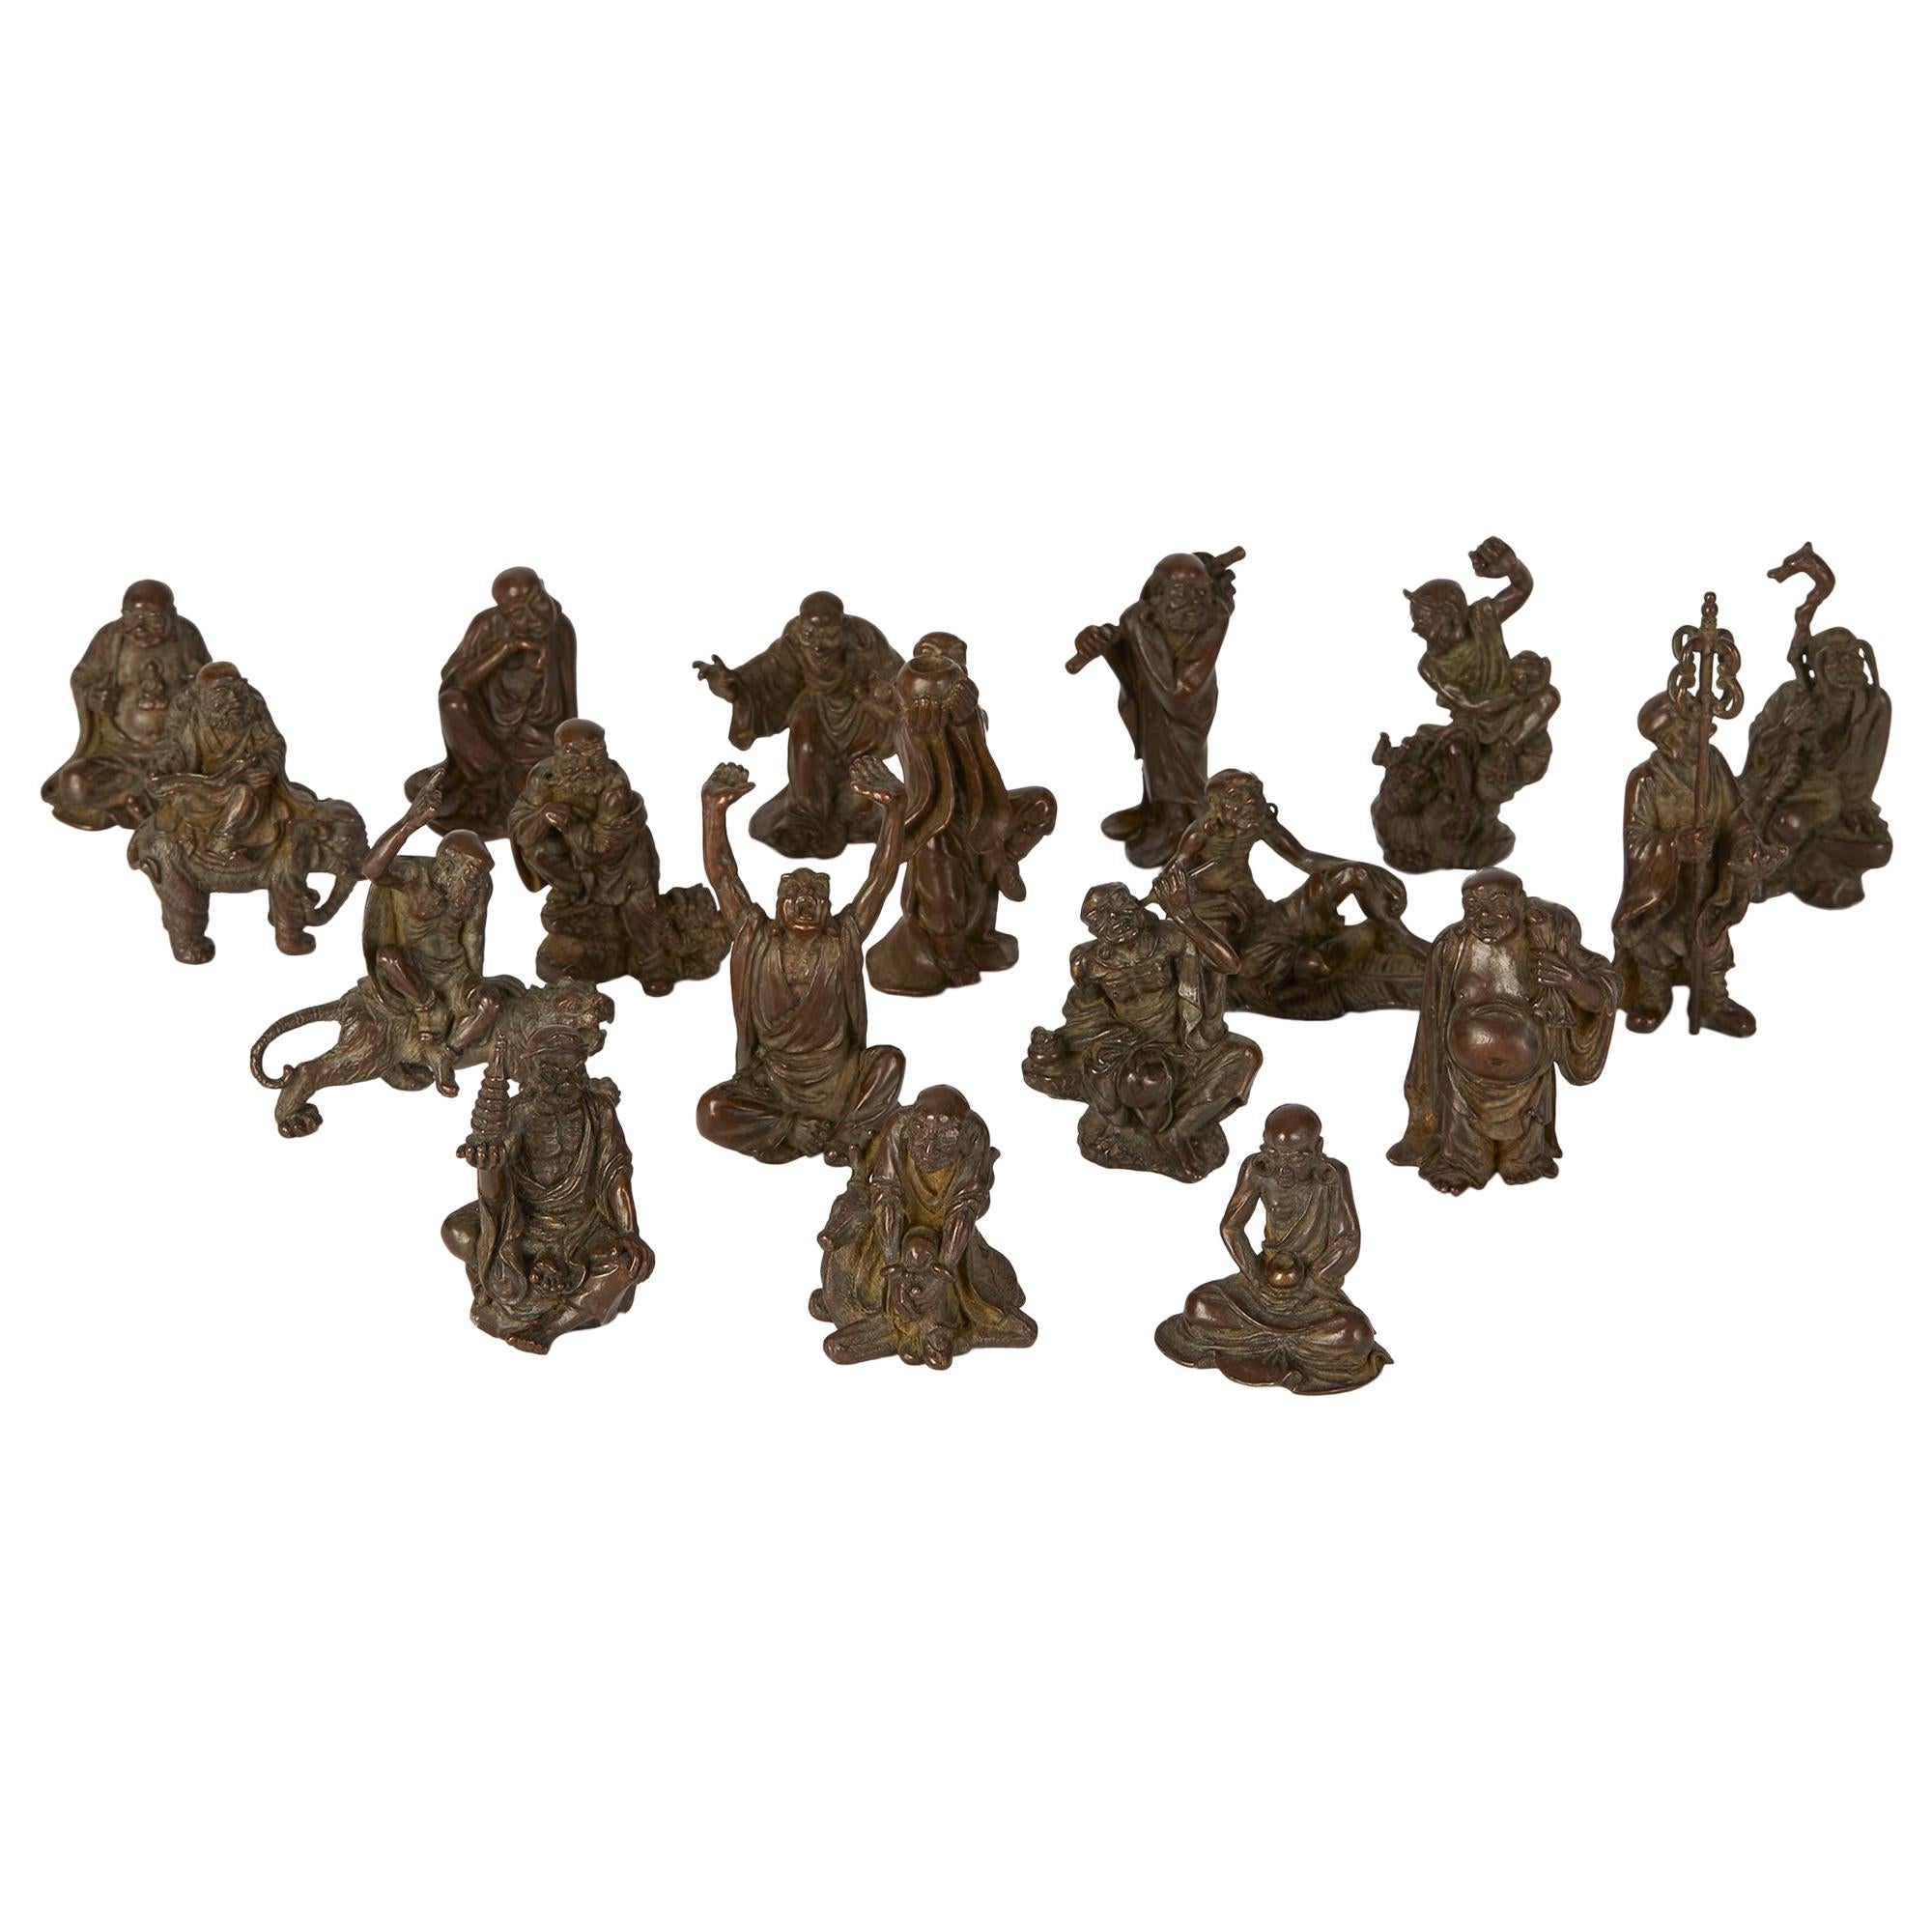 https://a.1stdibscdn.com/bronze-collection-eighteen-luohan-disciples-18th-19th-century-for-sale/1121189/f_170493411574953709698/17049341_master.jpg